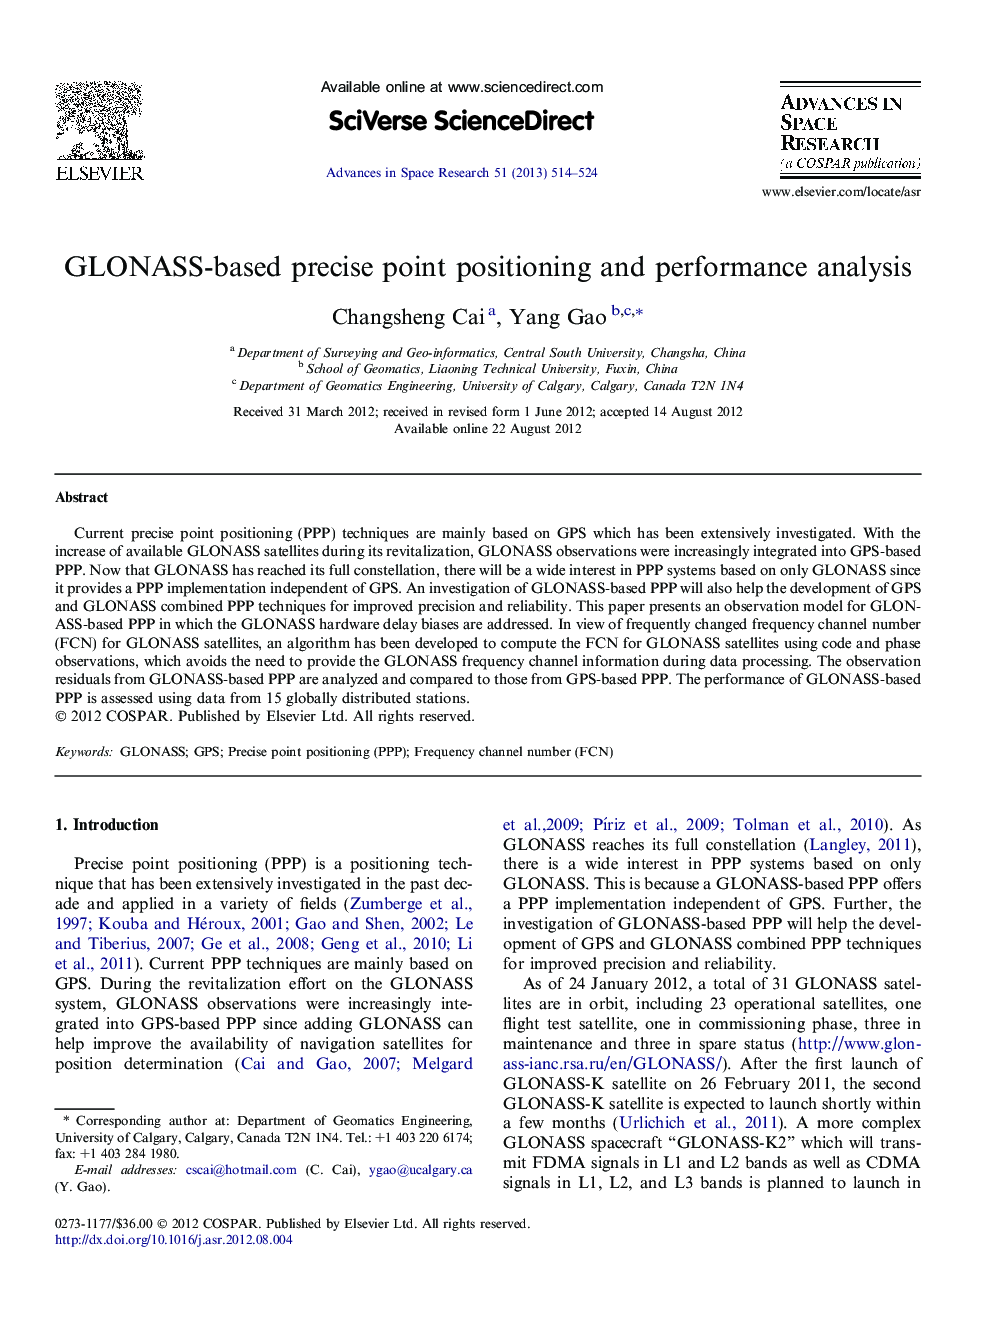 GLONASS-based precise point positioning and performance analysis